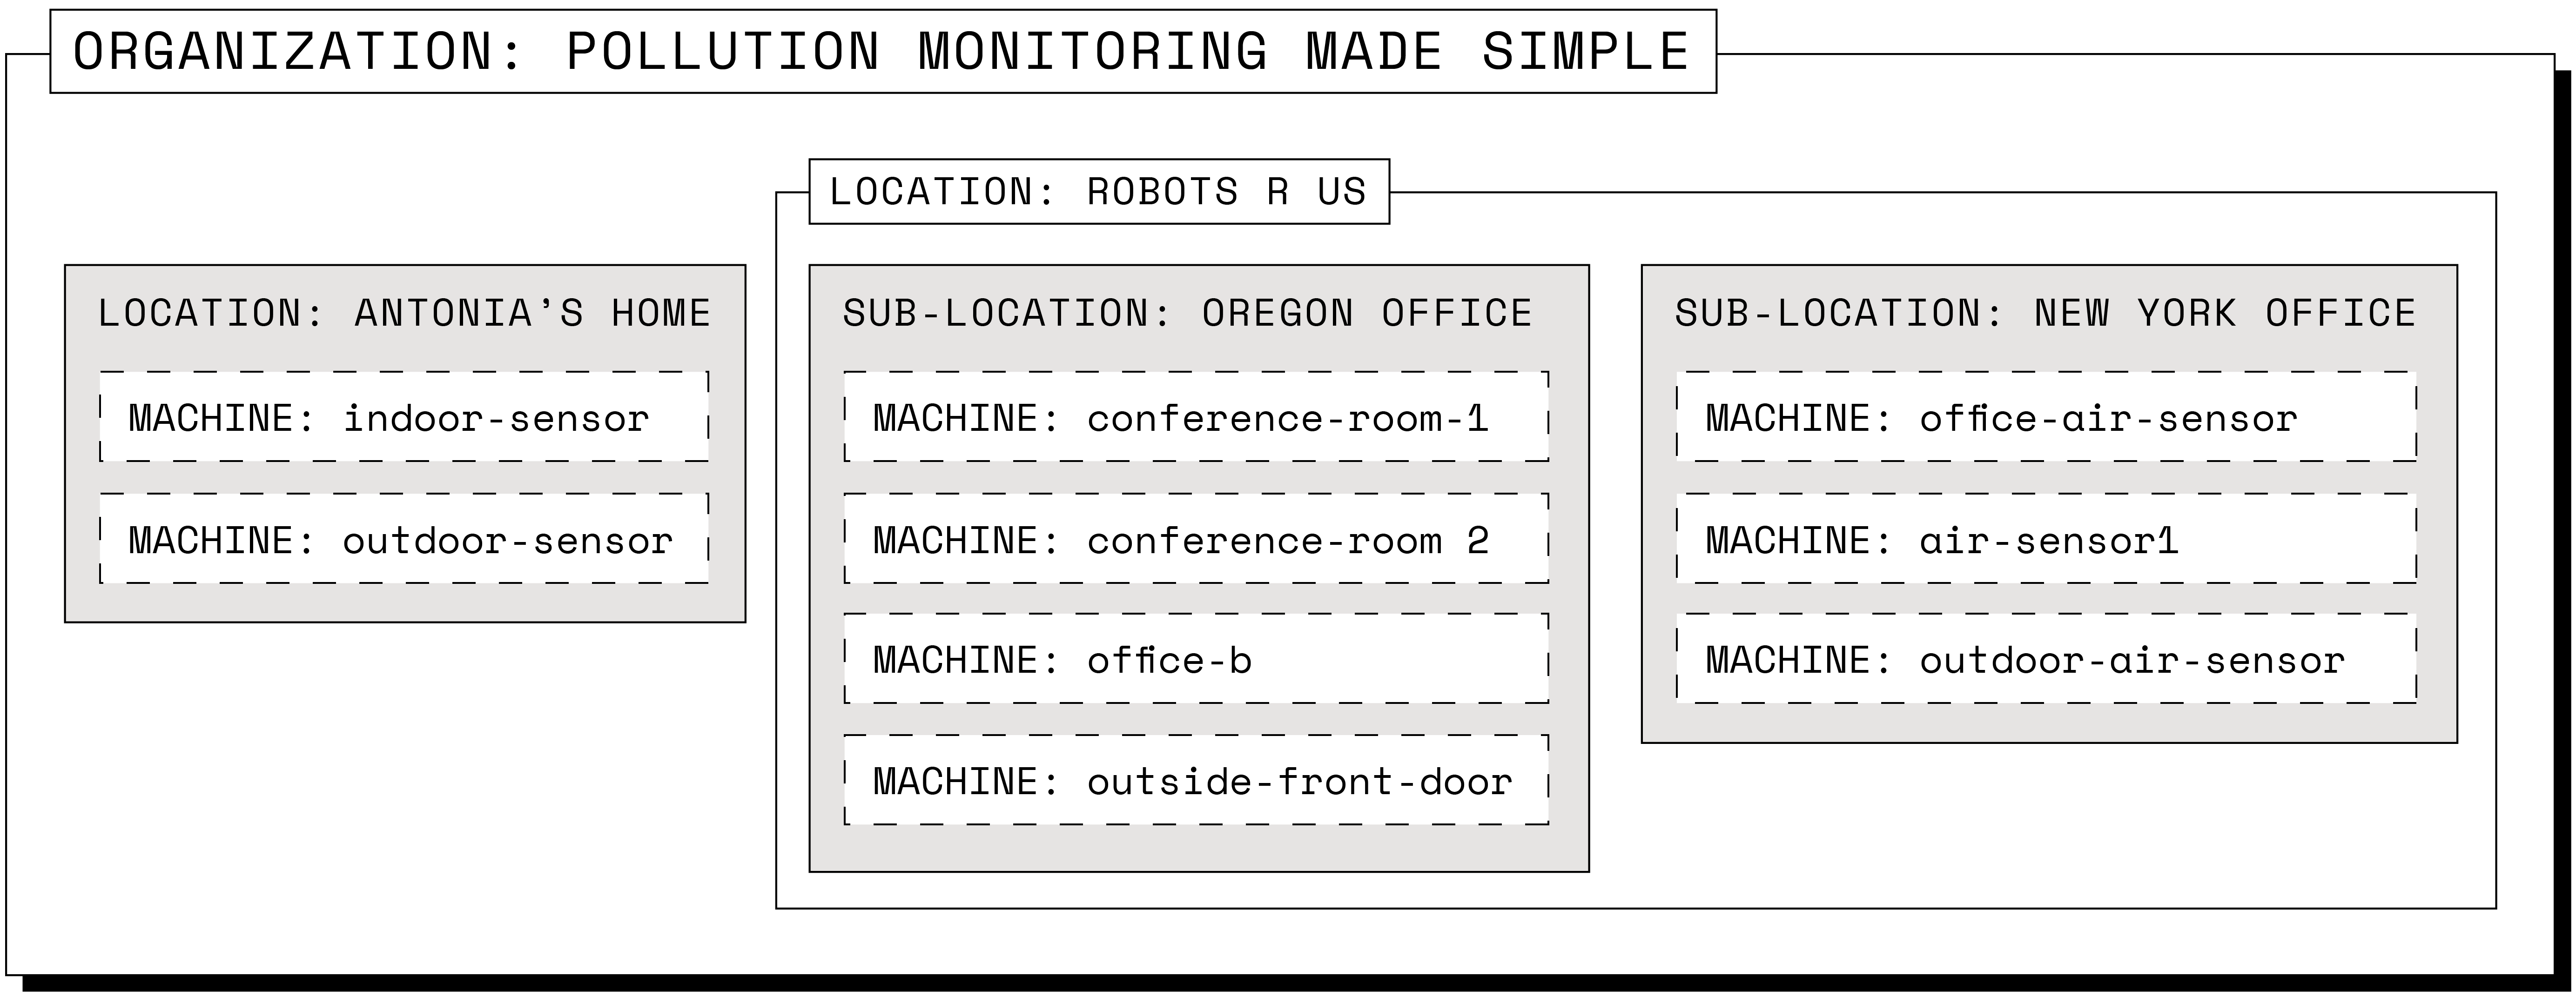 Diagram of the Pollution Monitoring Made Simple organization. In it are two locations: Antonia's HOme and Robots R Us. Robots R Us contains two sub-locations, each containing some machines. The Antonia's Home location contains two machines (and no sub-locations).